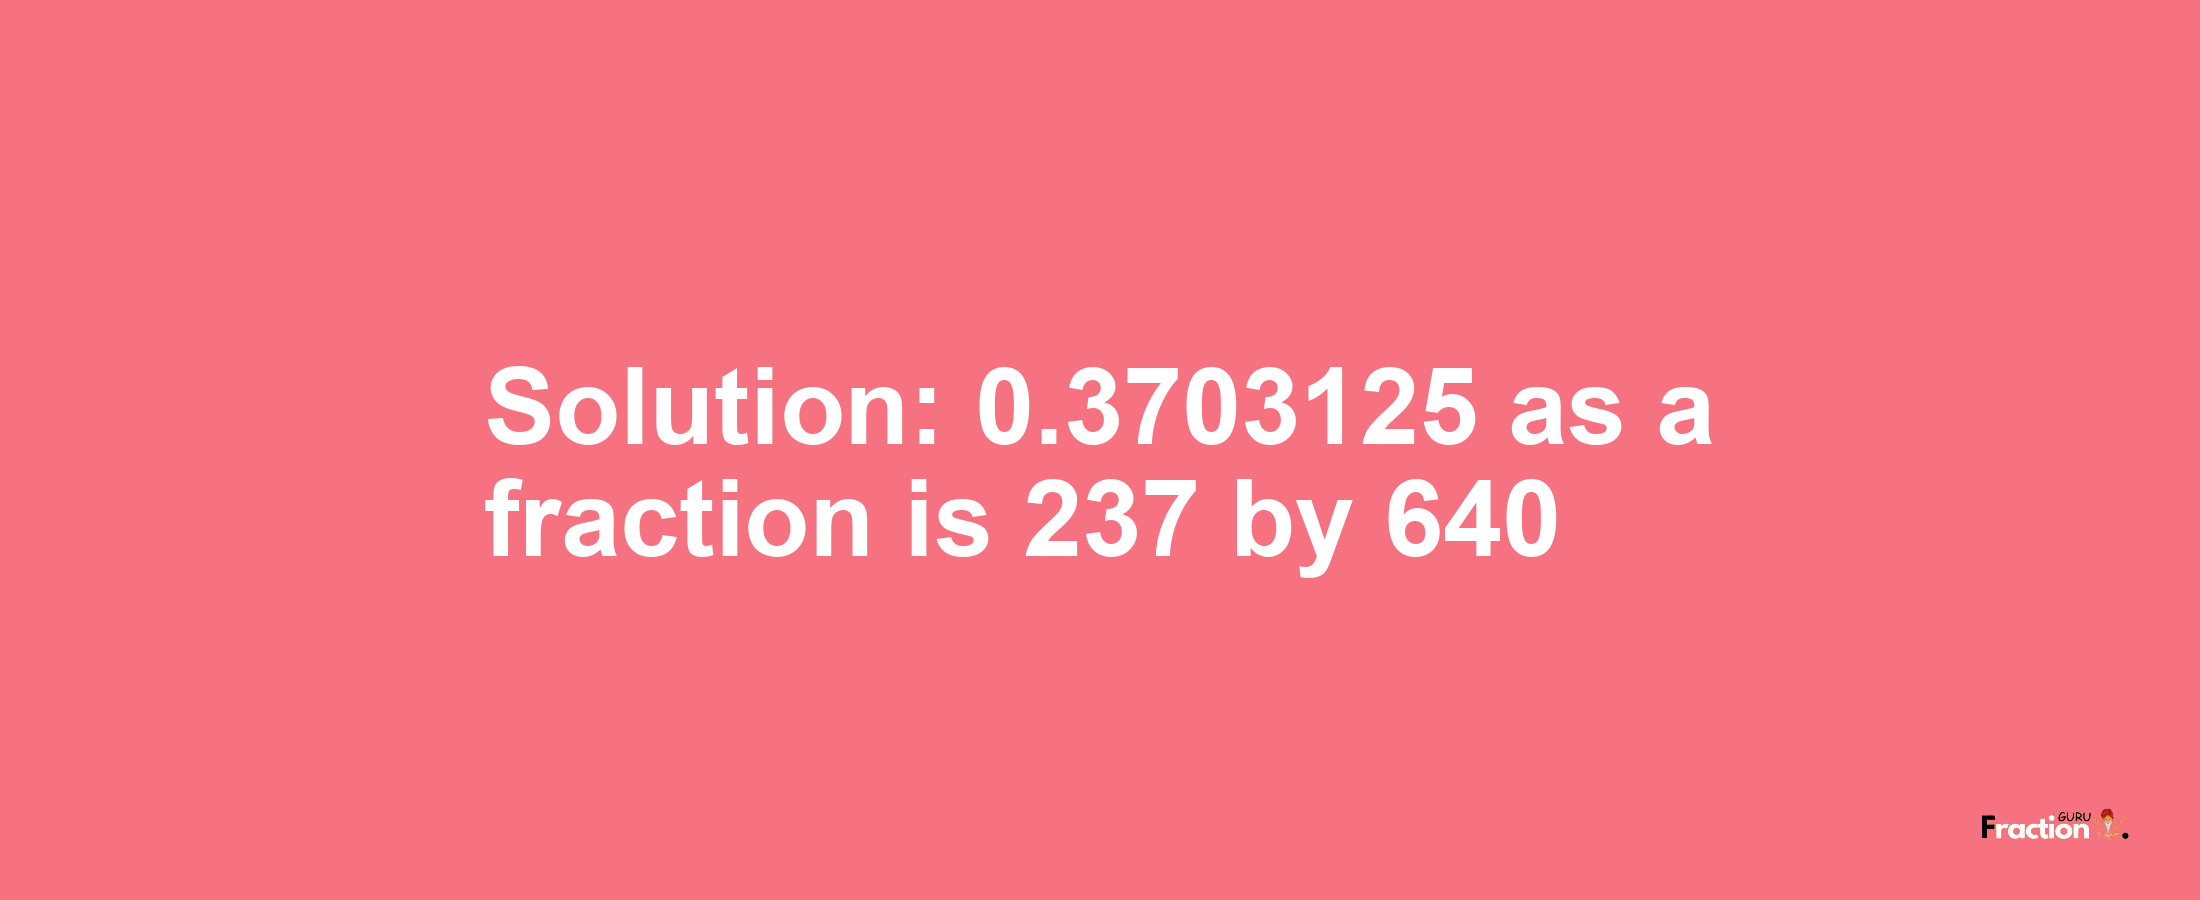 Solution:0.3703125 as a fraction is 237/640